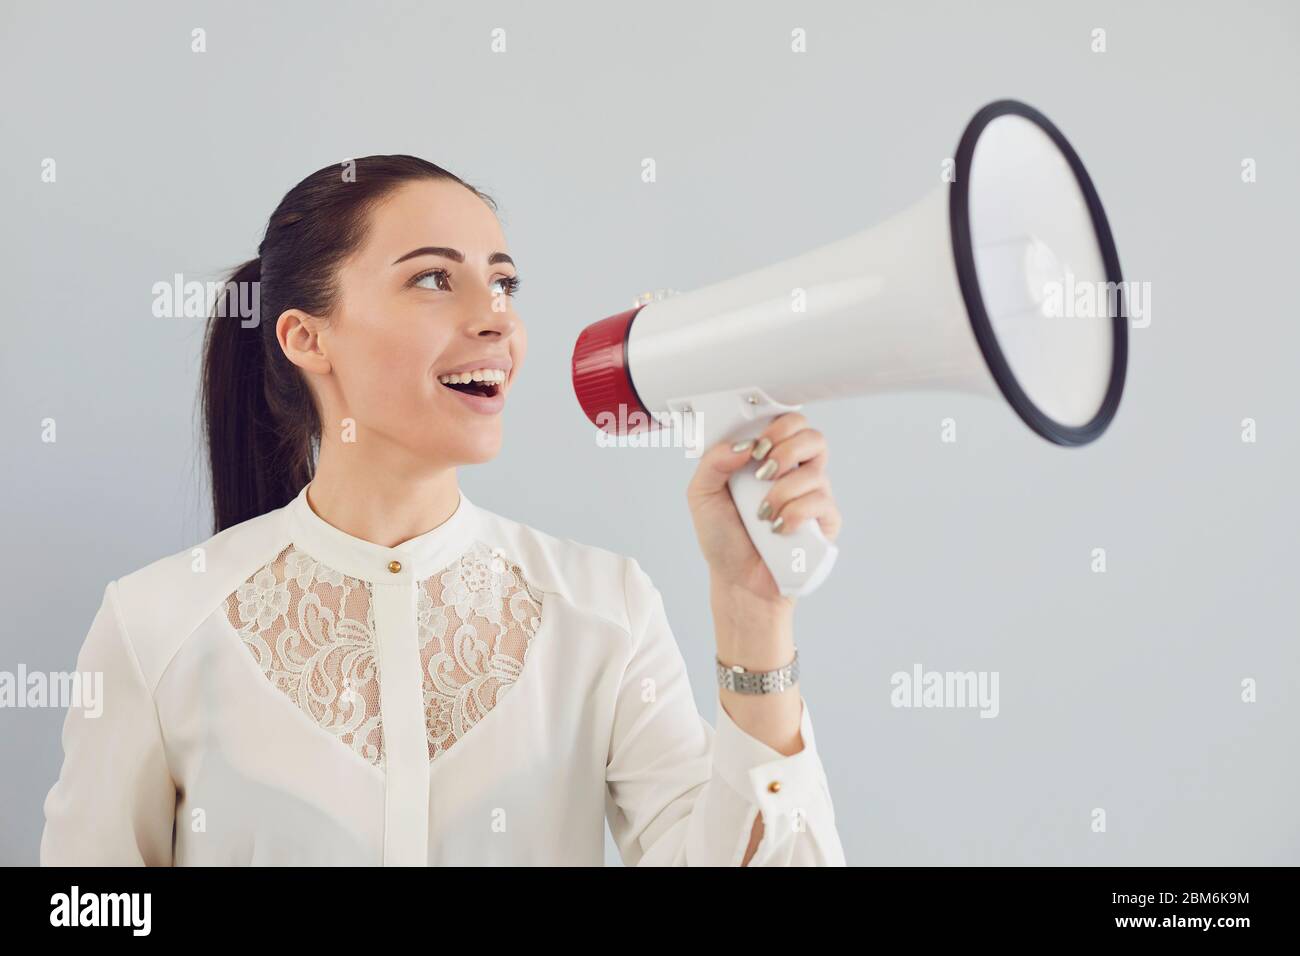 A woman in a white shirt in a bullhorn on a gray background. Stock Photo